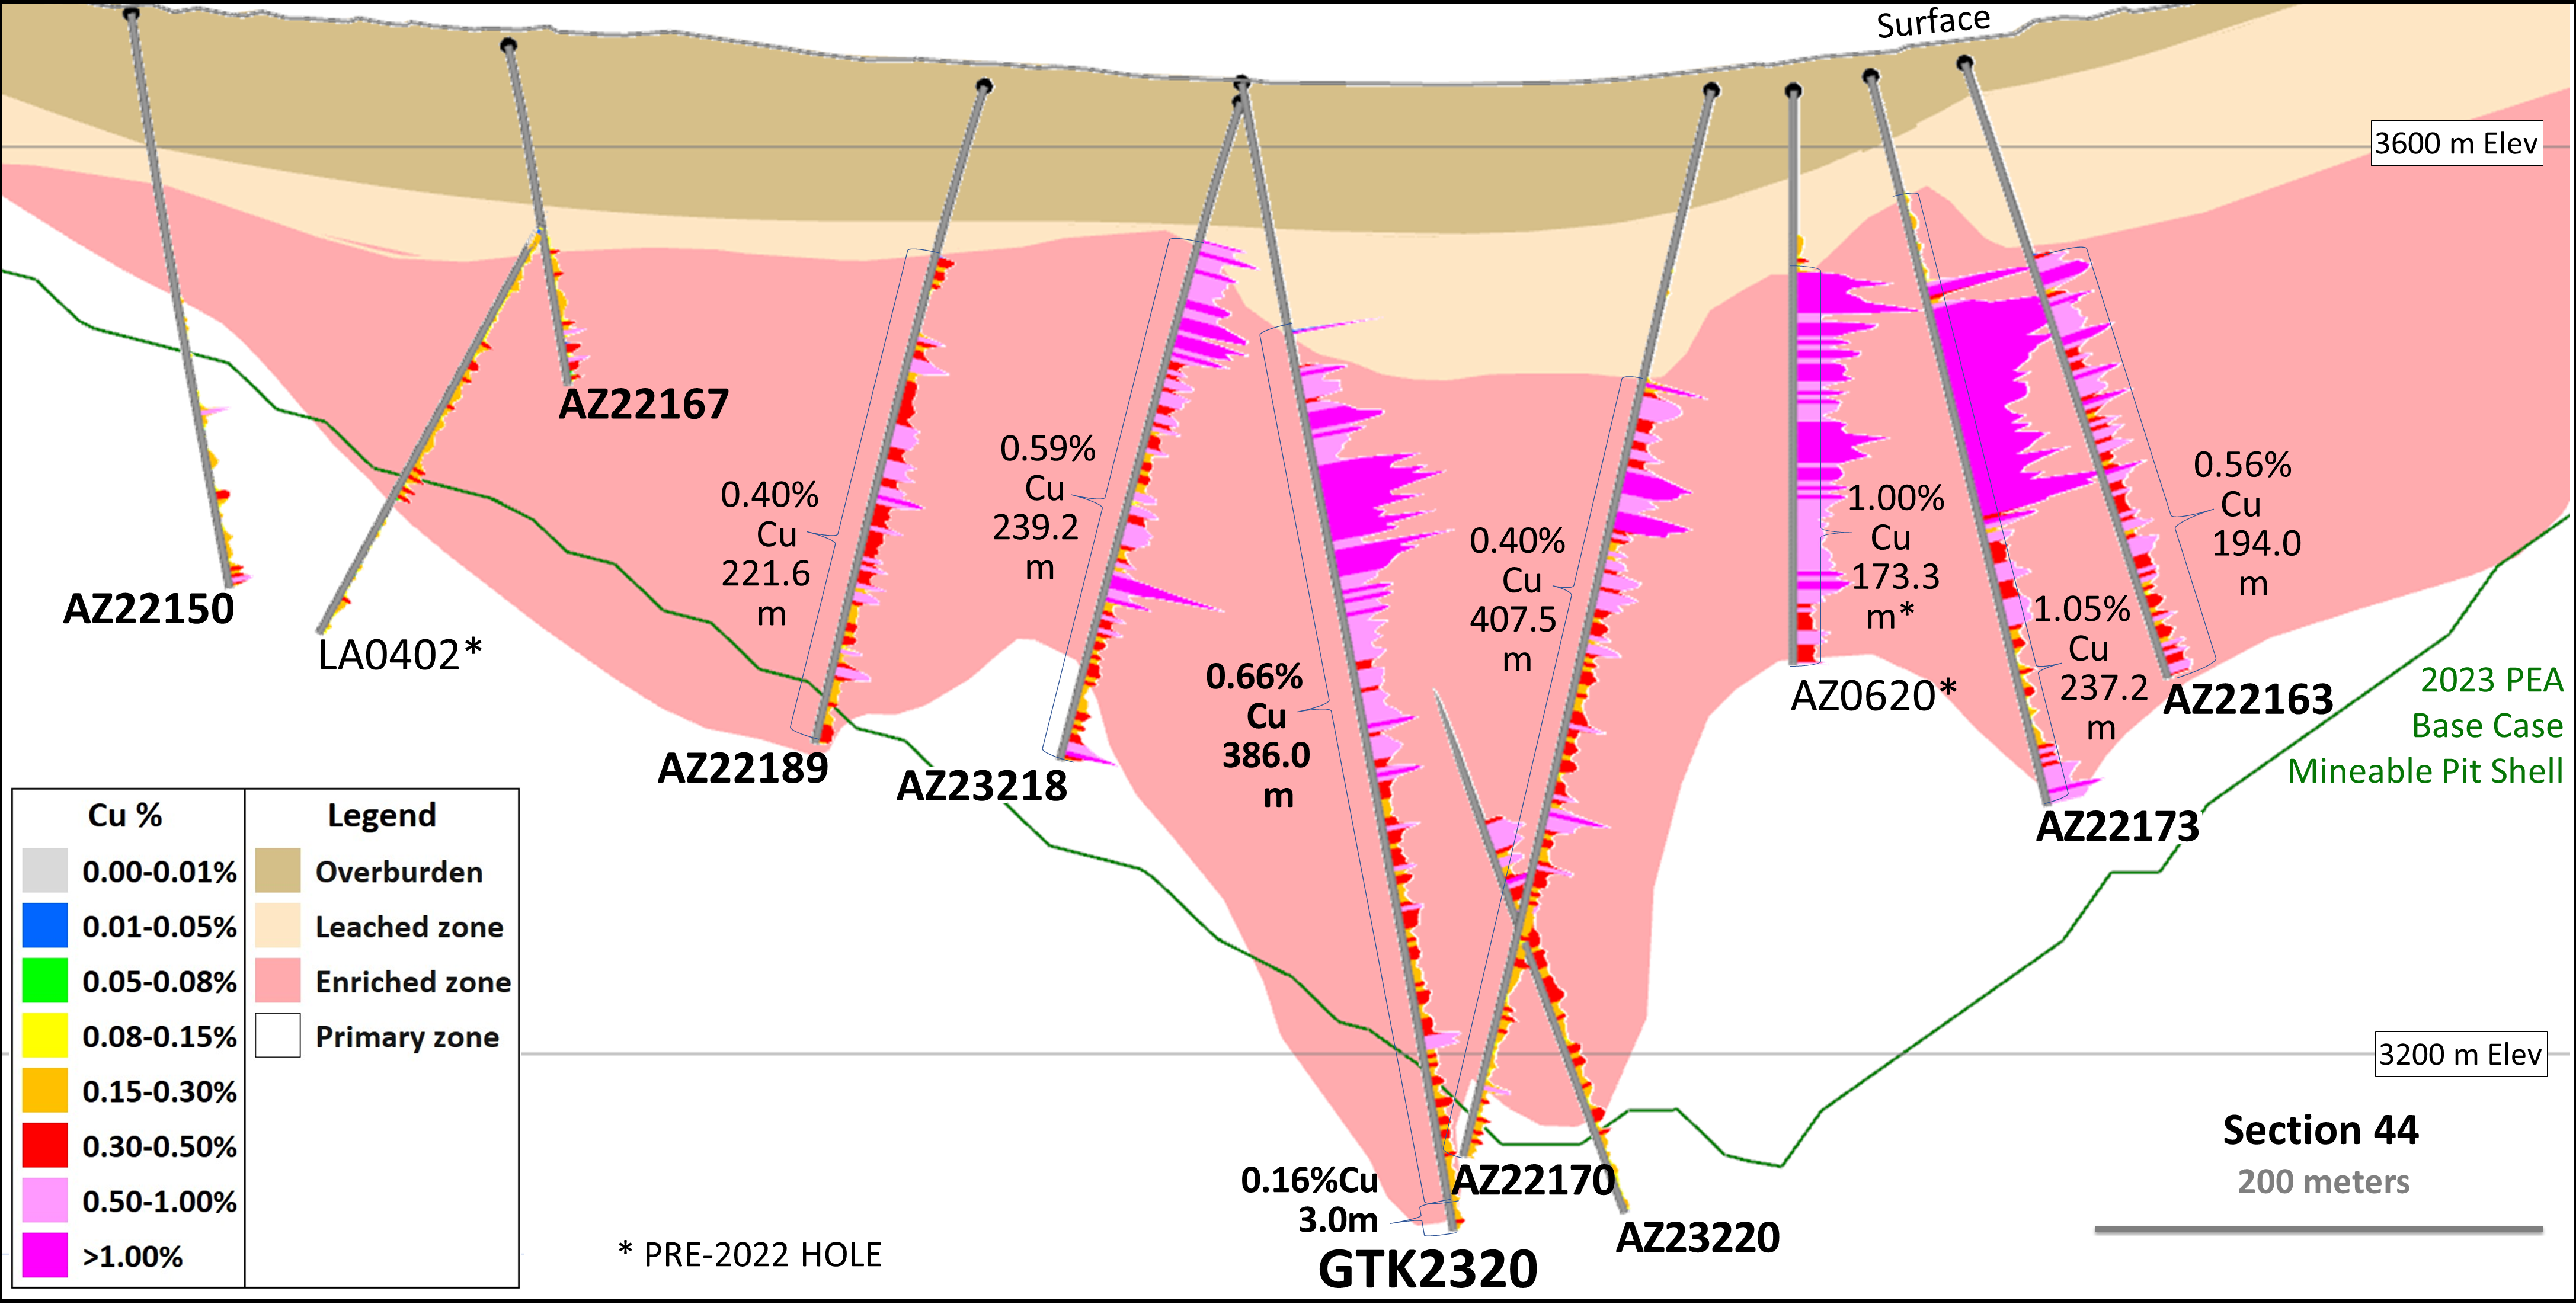 Figure 2 - Section 44 - Drilling, Mineral Zones & 2023 Base Case Mineable Resource Pit (Looking North)